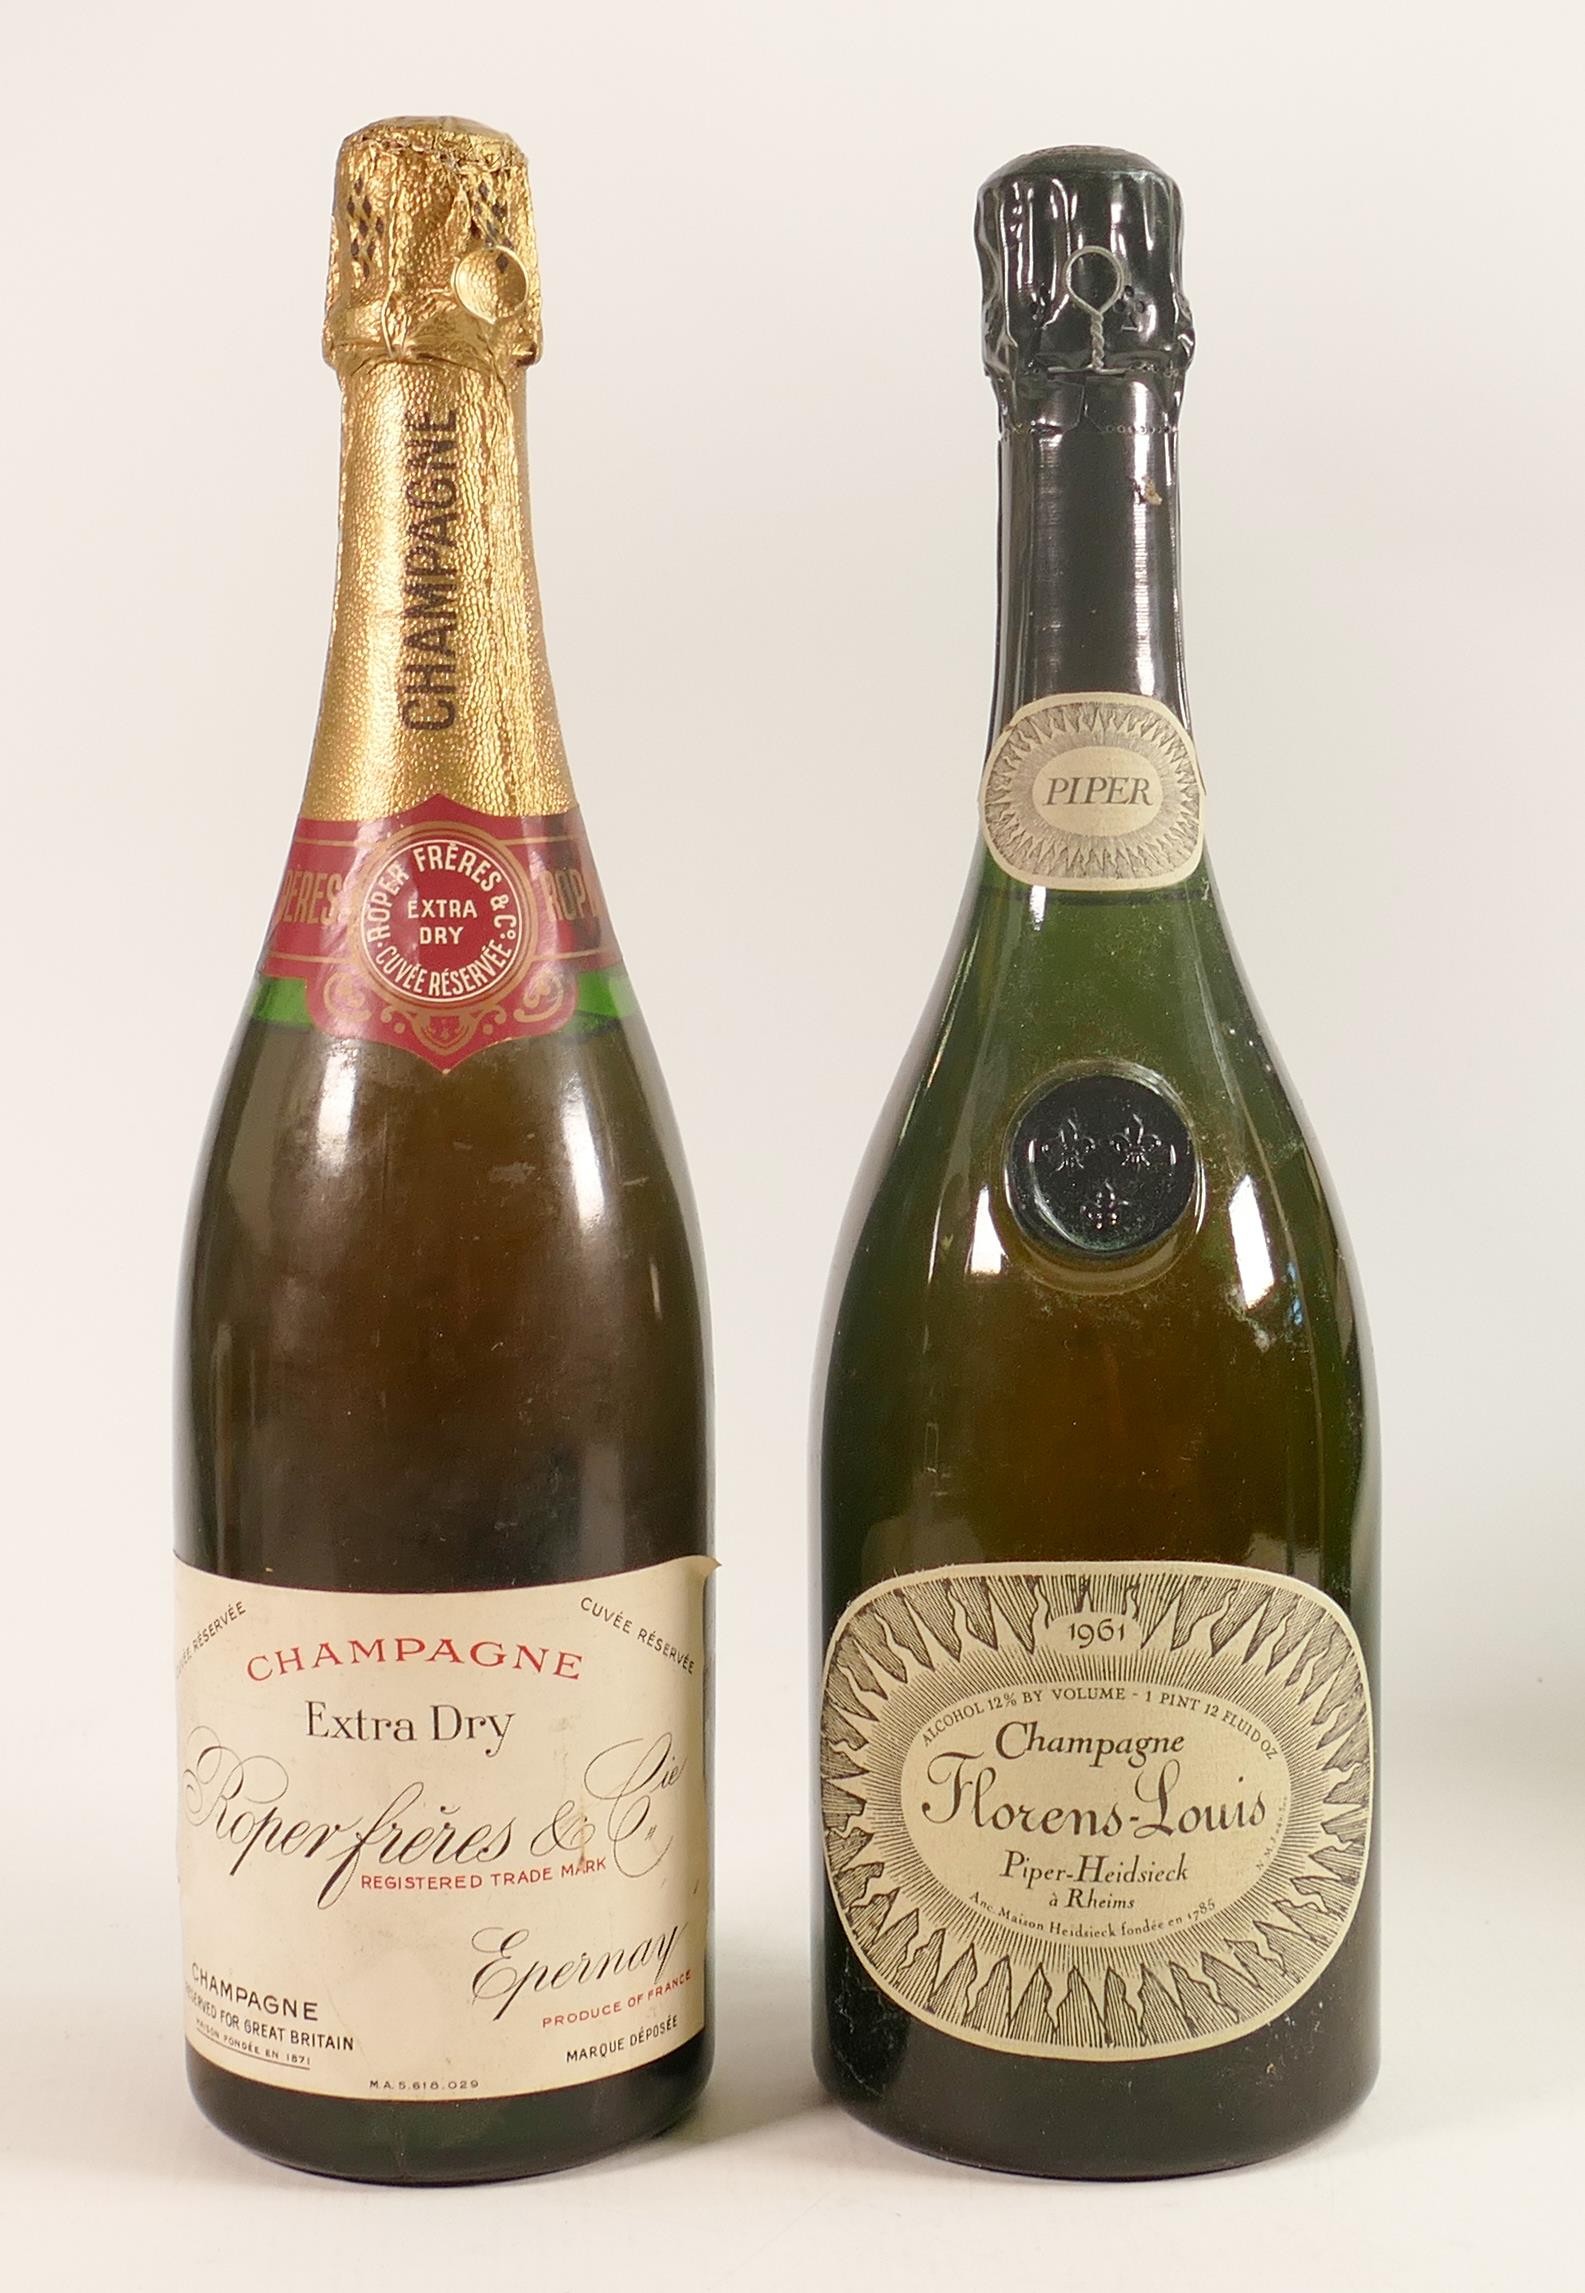 Boxed 1961 Piper Heidsieck Cuvee Florens Louis Champagne & similar Roper Freres extra dry Champagne. - Image 2 of 2